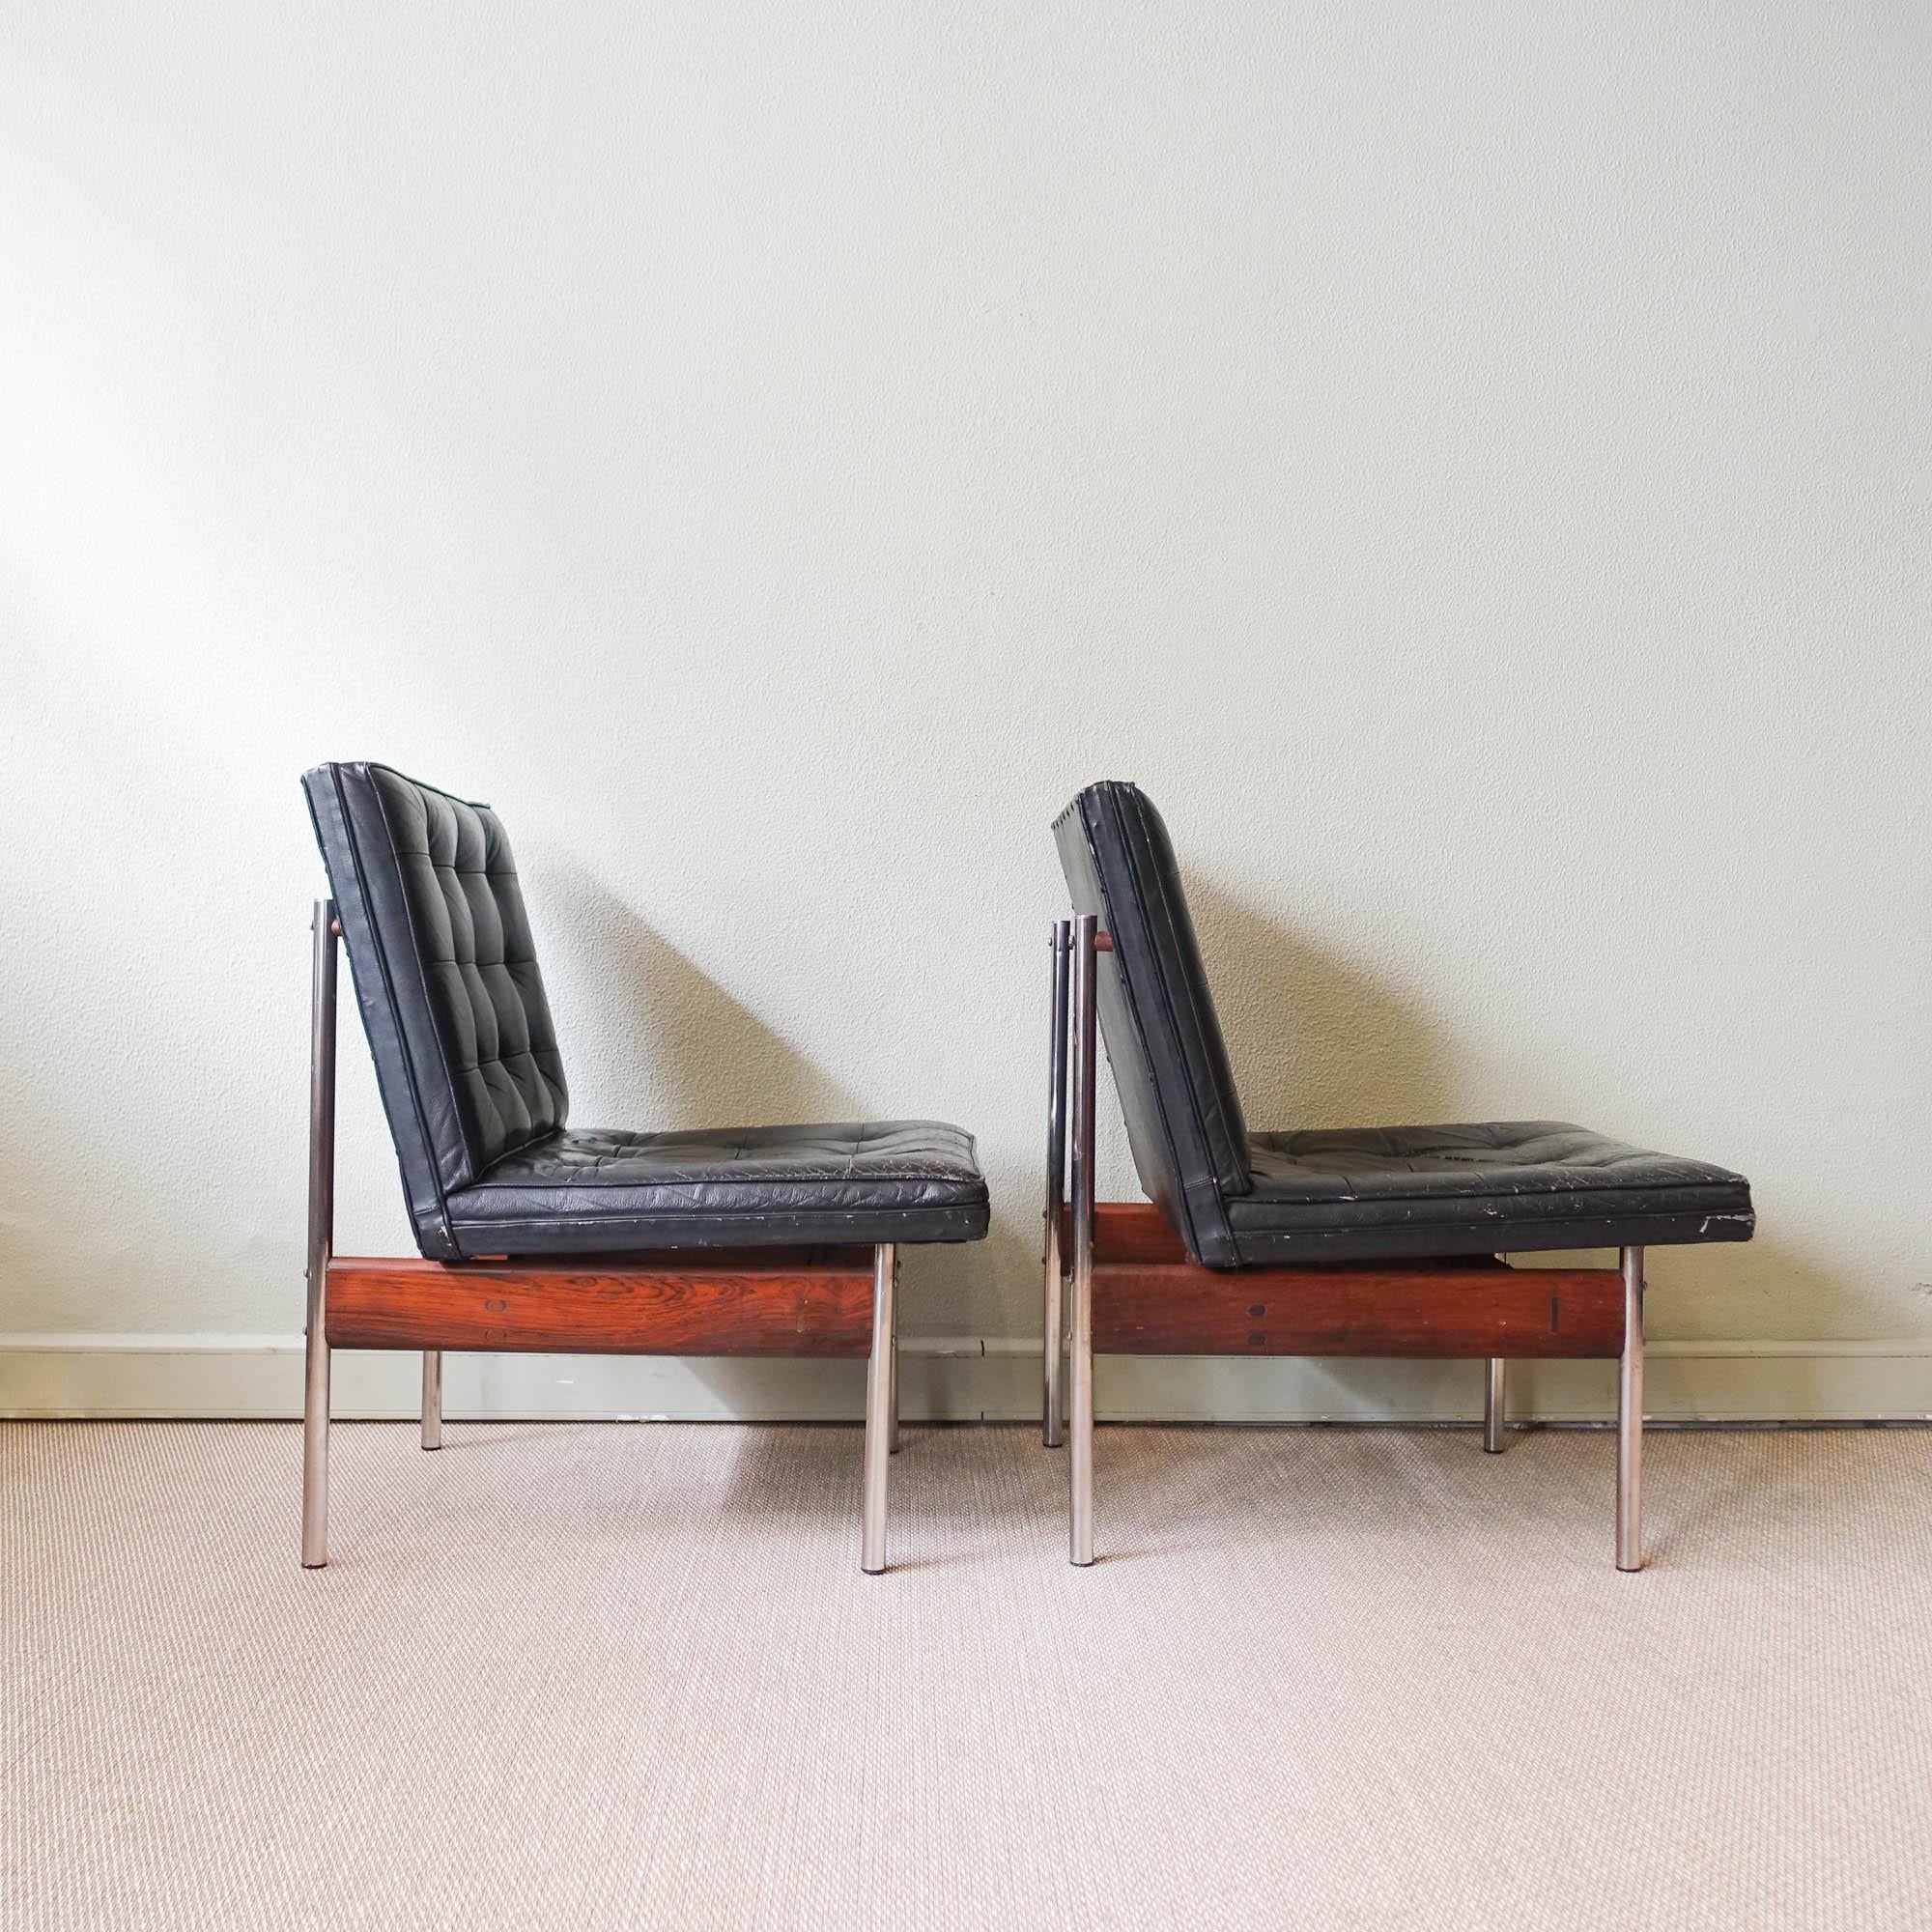 Metal Pair of Lounge Chairs by Móveis Cimo, 1970's For Sale